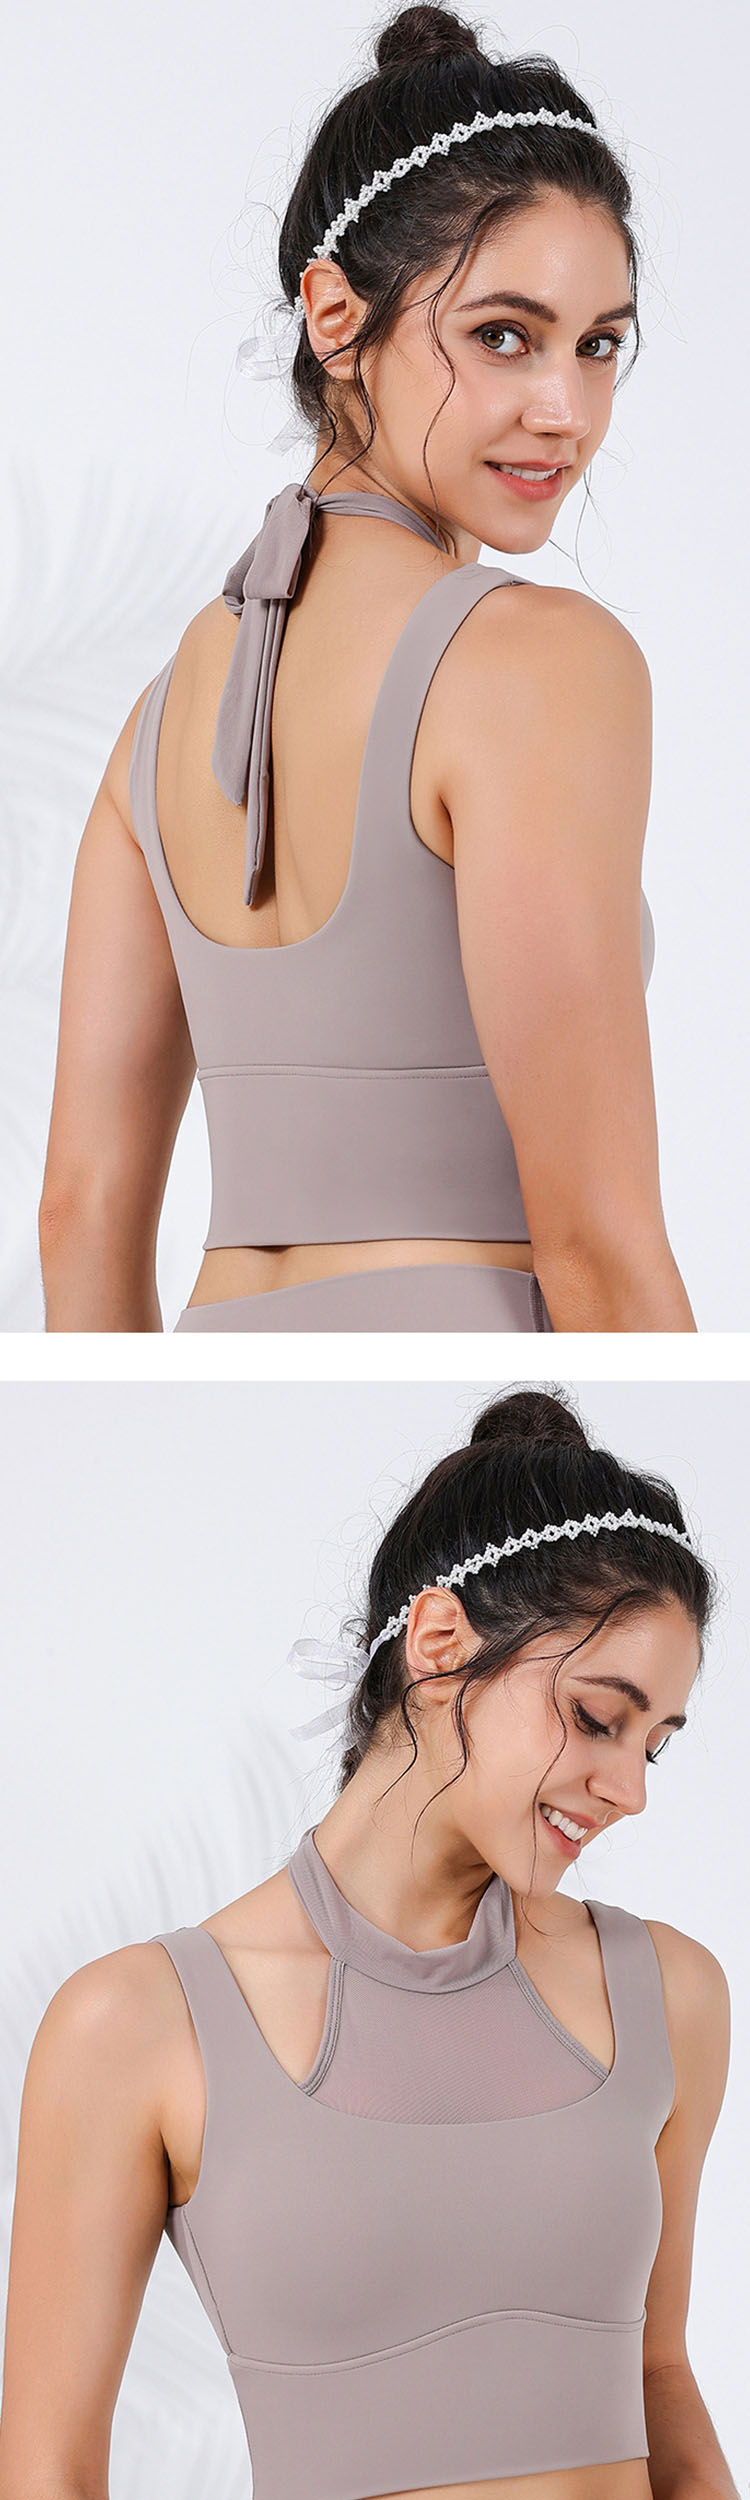 So if you're looking for a high-performance sports bra that combines style and functionality